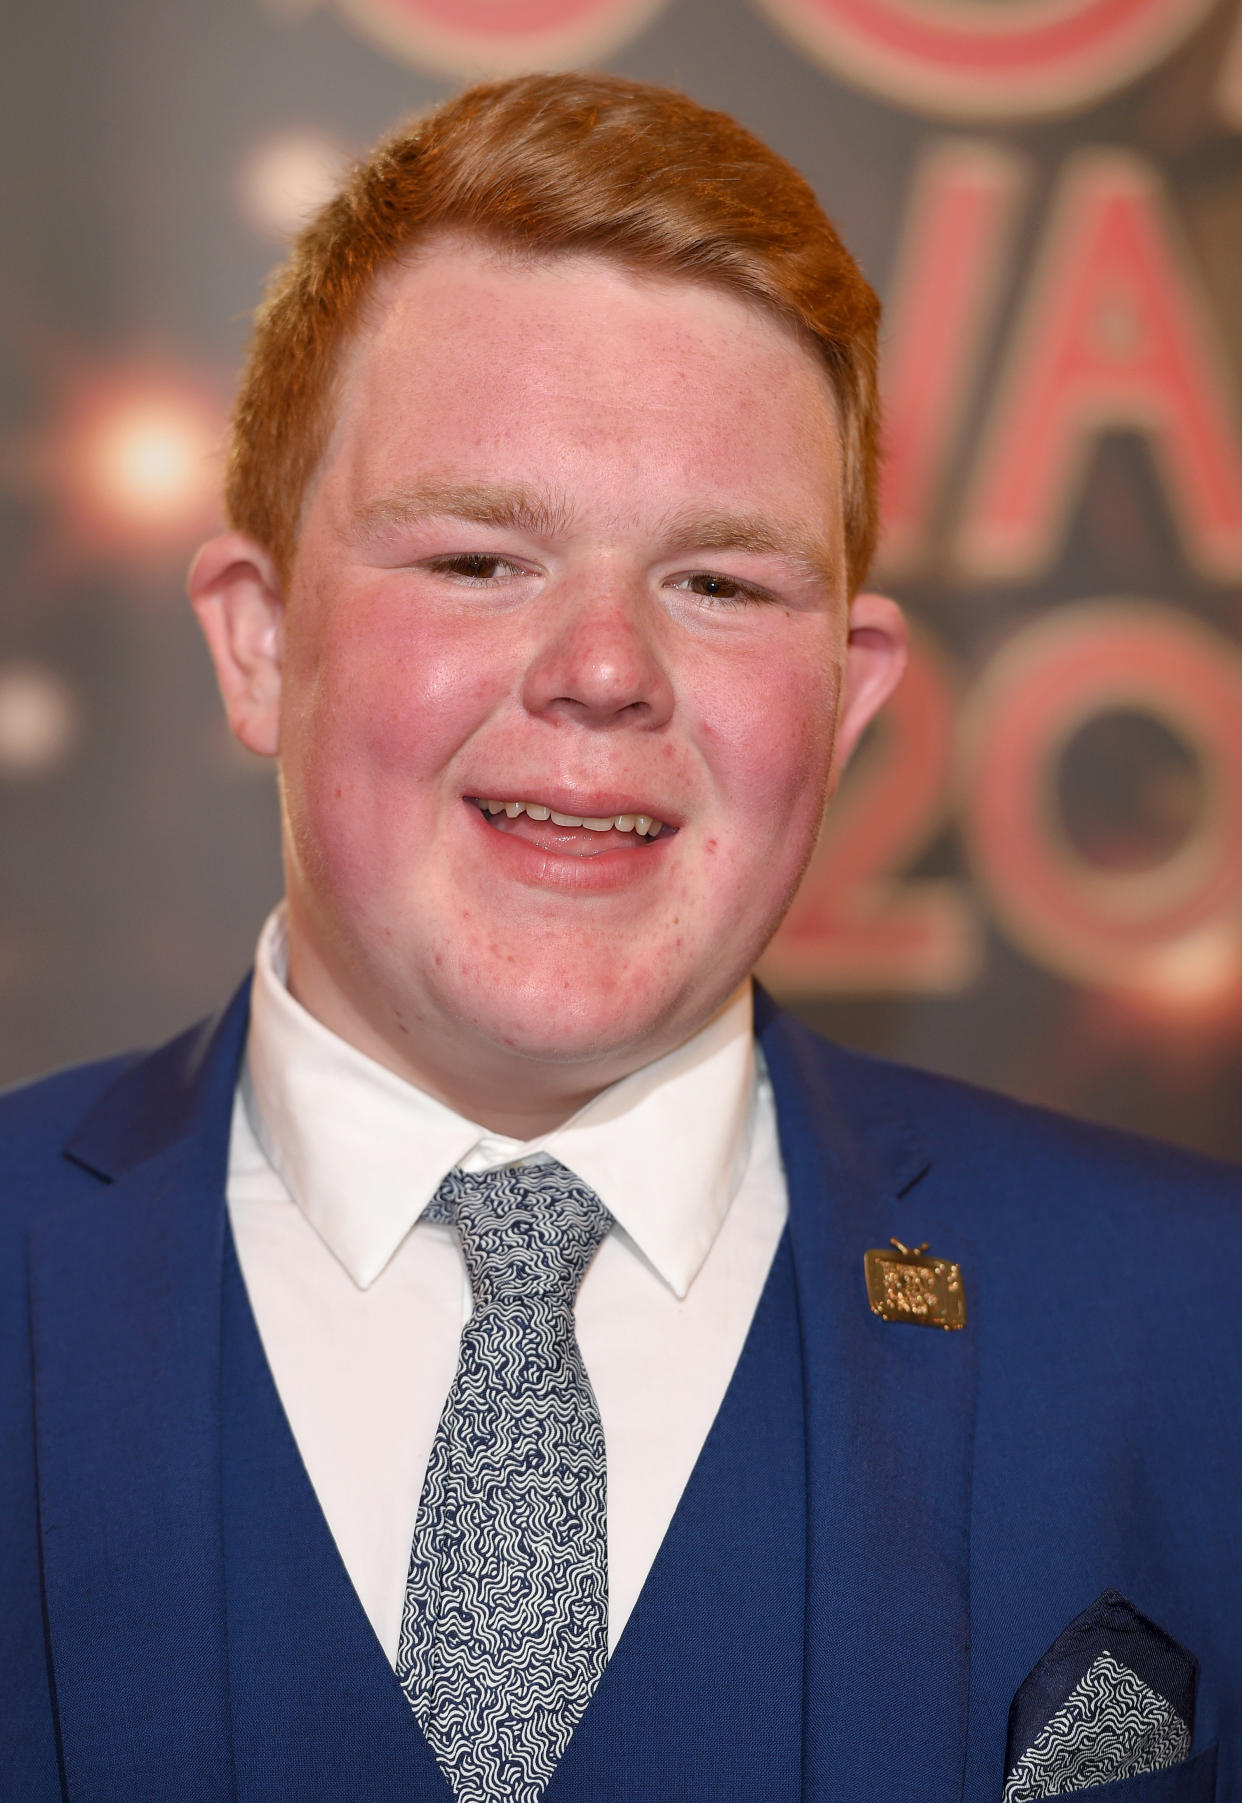 MANCHESTER, ENGLAND - MAY 16:  Colson Smith attends the British Soap Awards at Manchester Palace Theatre on May 16, 2015 in Manchester, England.  (Photo by Karwai Tang/WireImage)